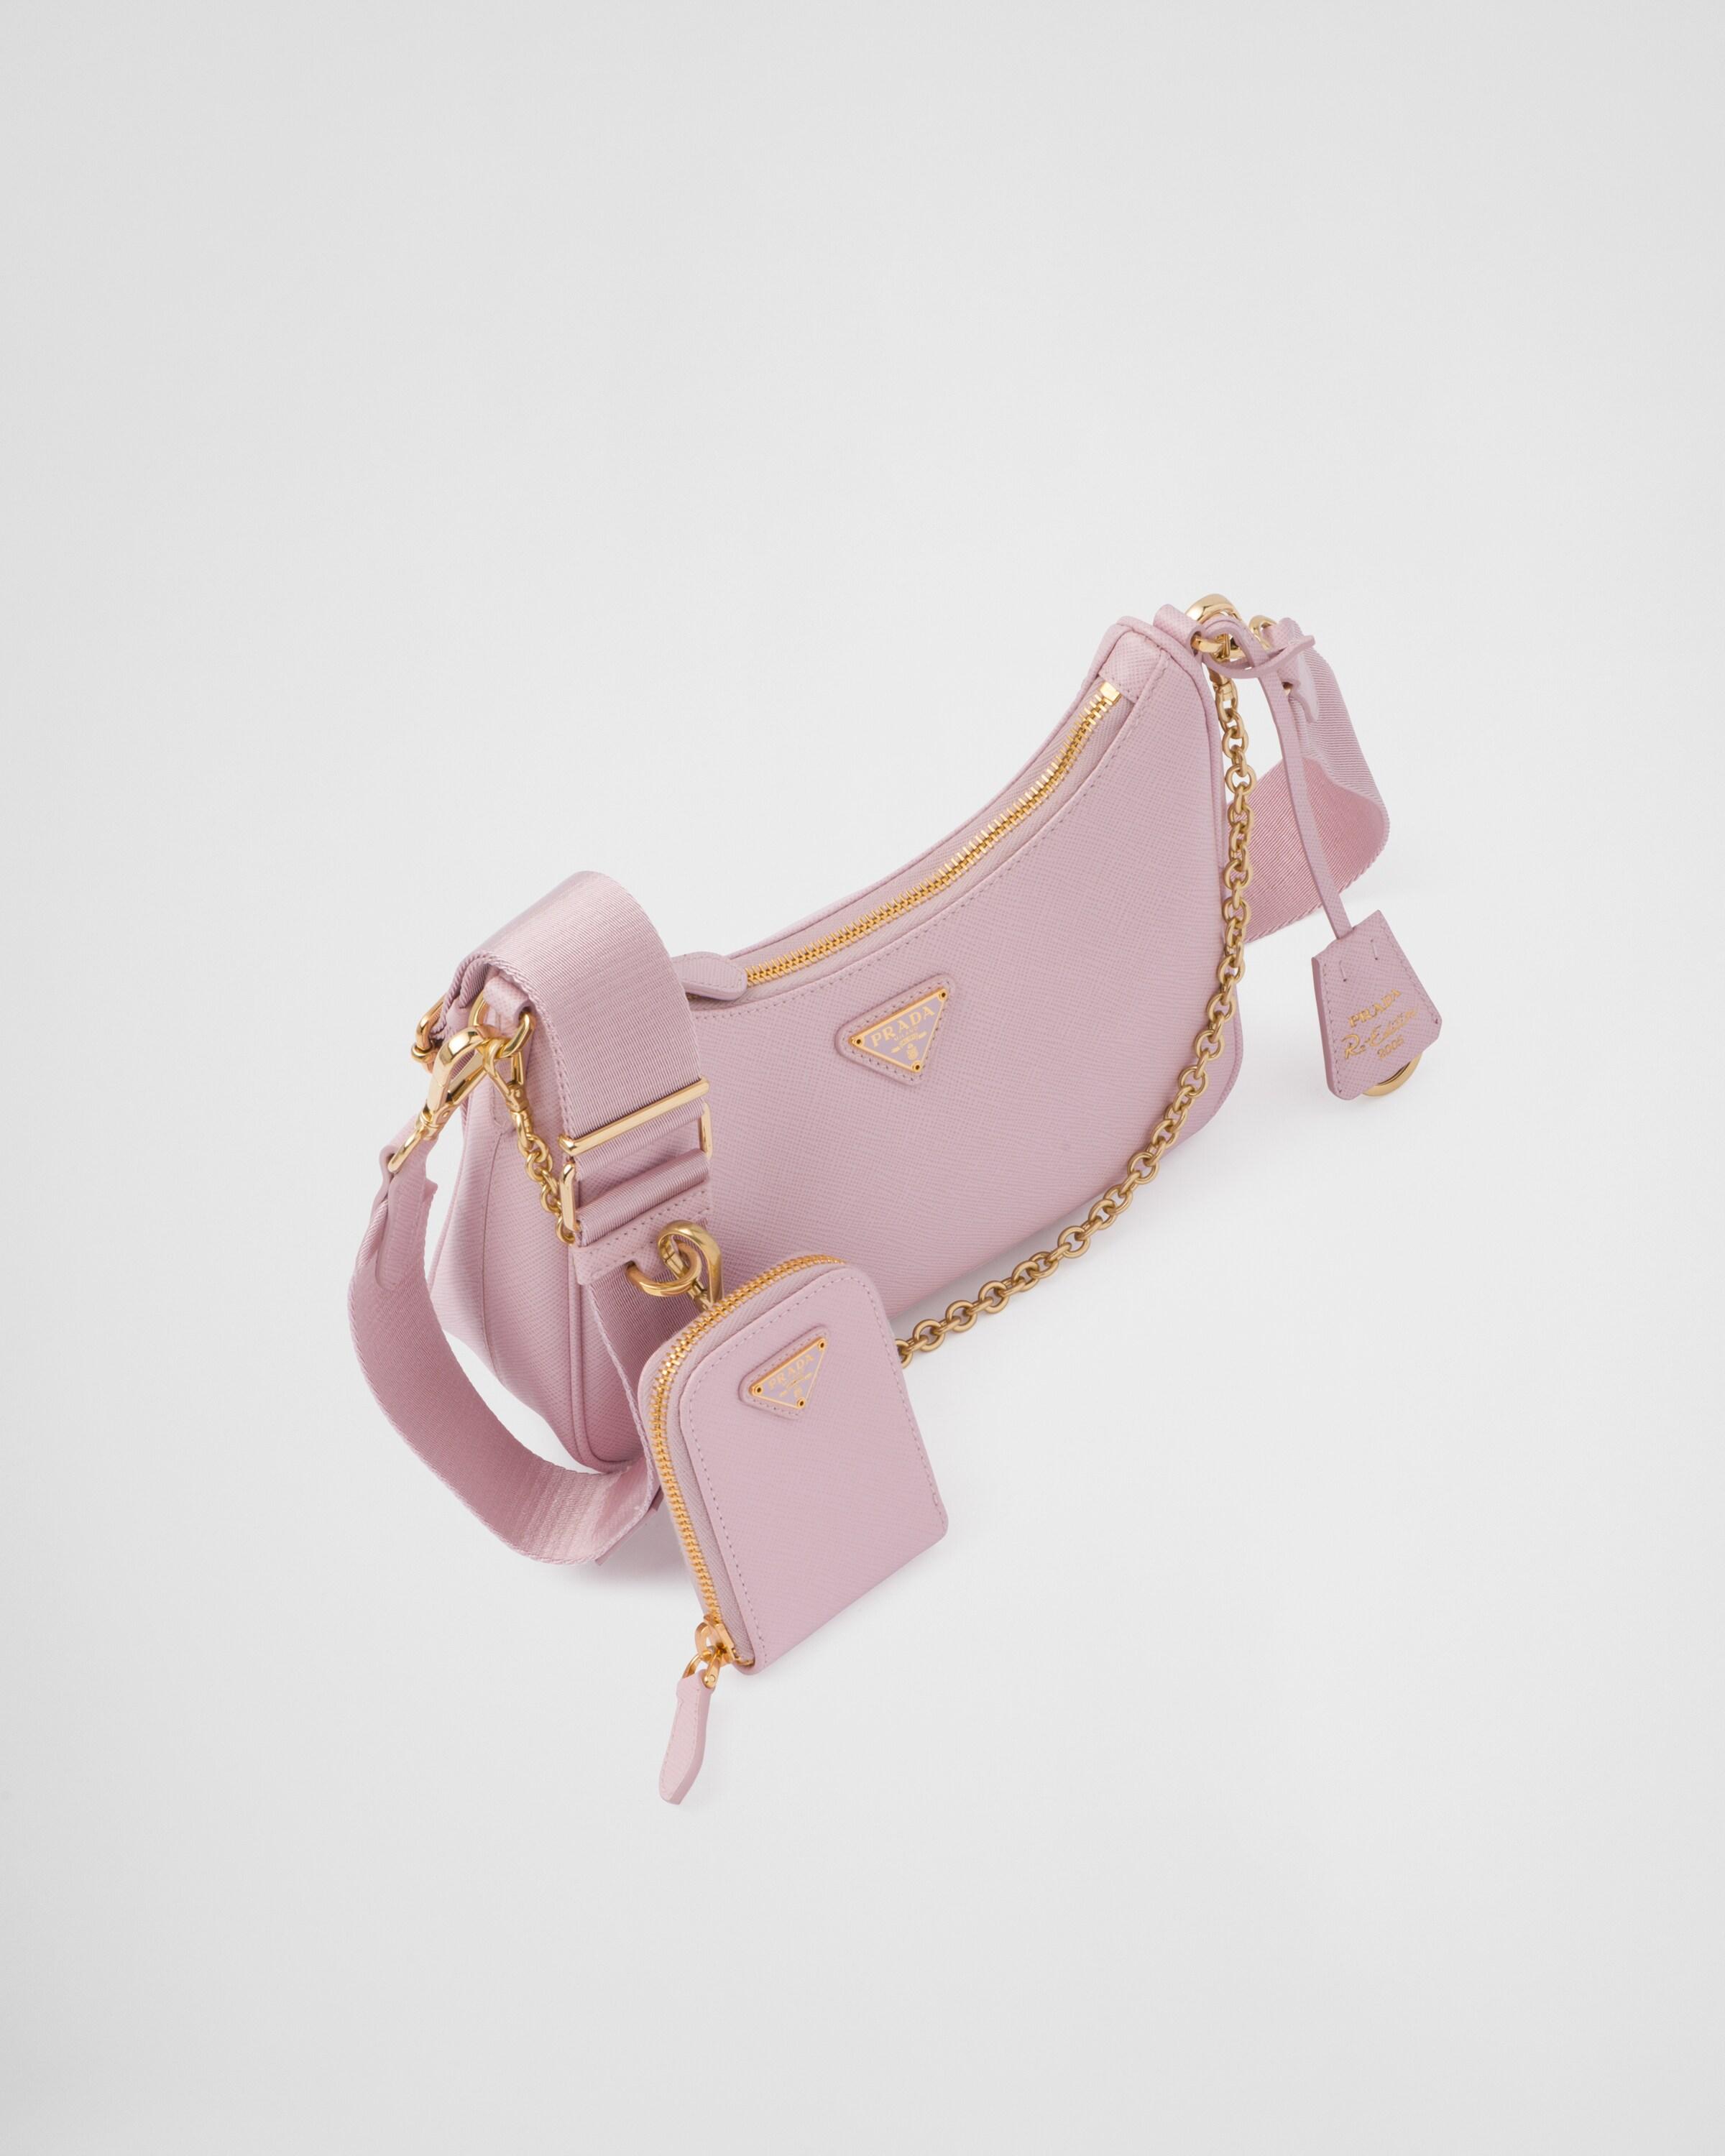 Prada Re-edition 2005 Saffiano Leather Bag in Pink